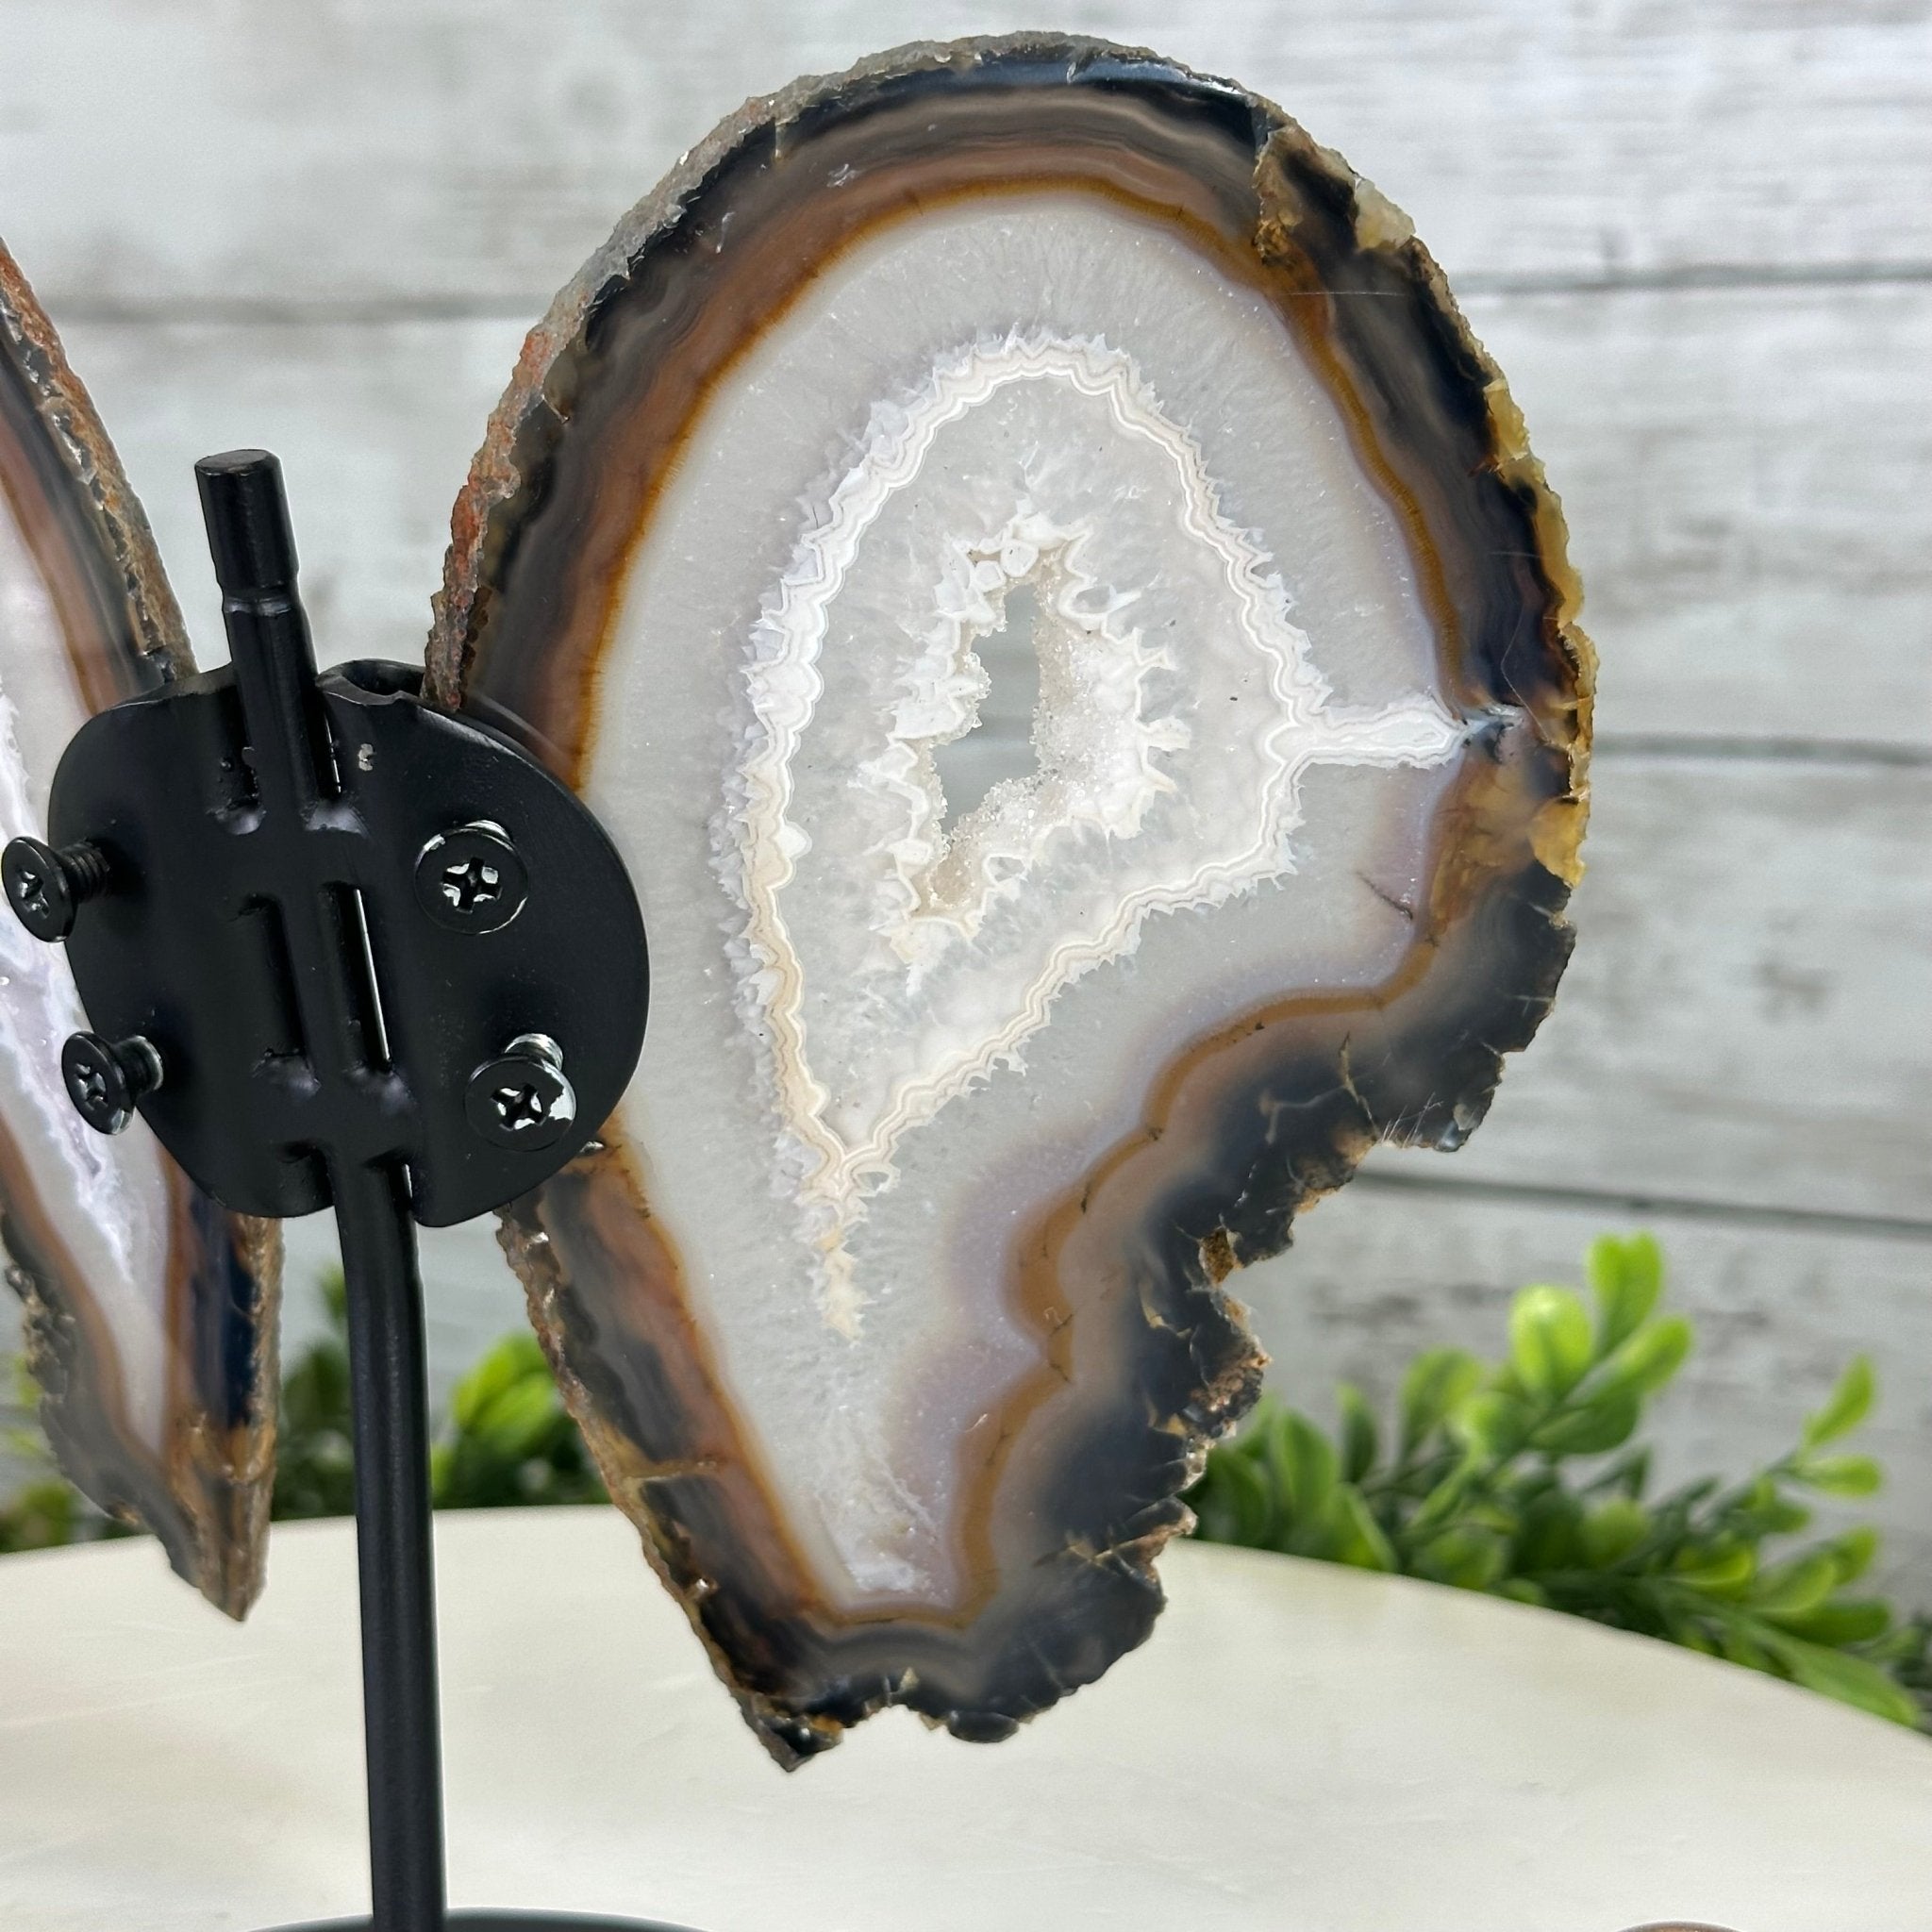 Natural Brazilian Agate "Butterfly Wings", 7.6" Tall #5050NA-136 - Brazil GemsBrazil GemsNatural Brazilian Agate "Butterfly Wings", 7.6" Tall #5050NA-136Agate Butterfly Wings5050NA-136